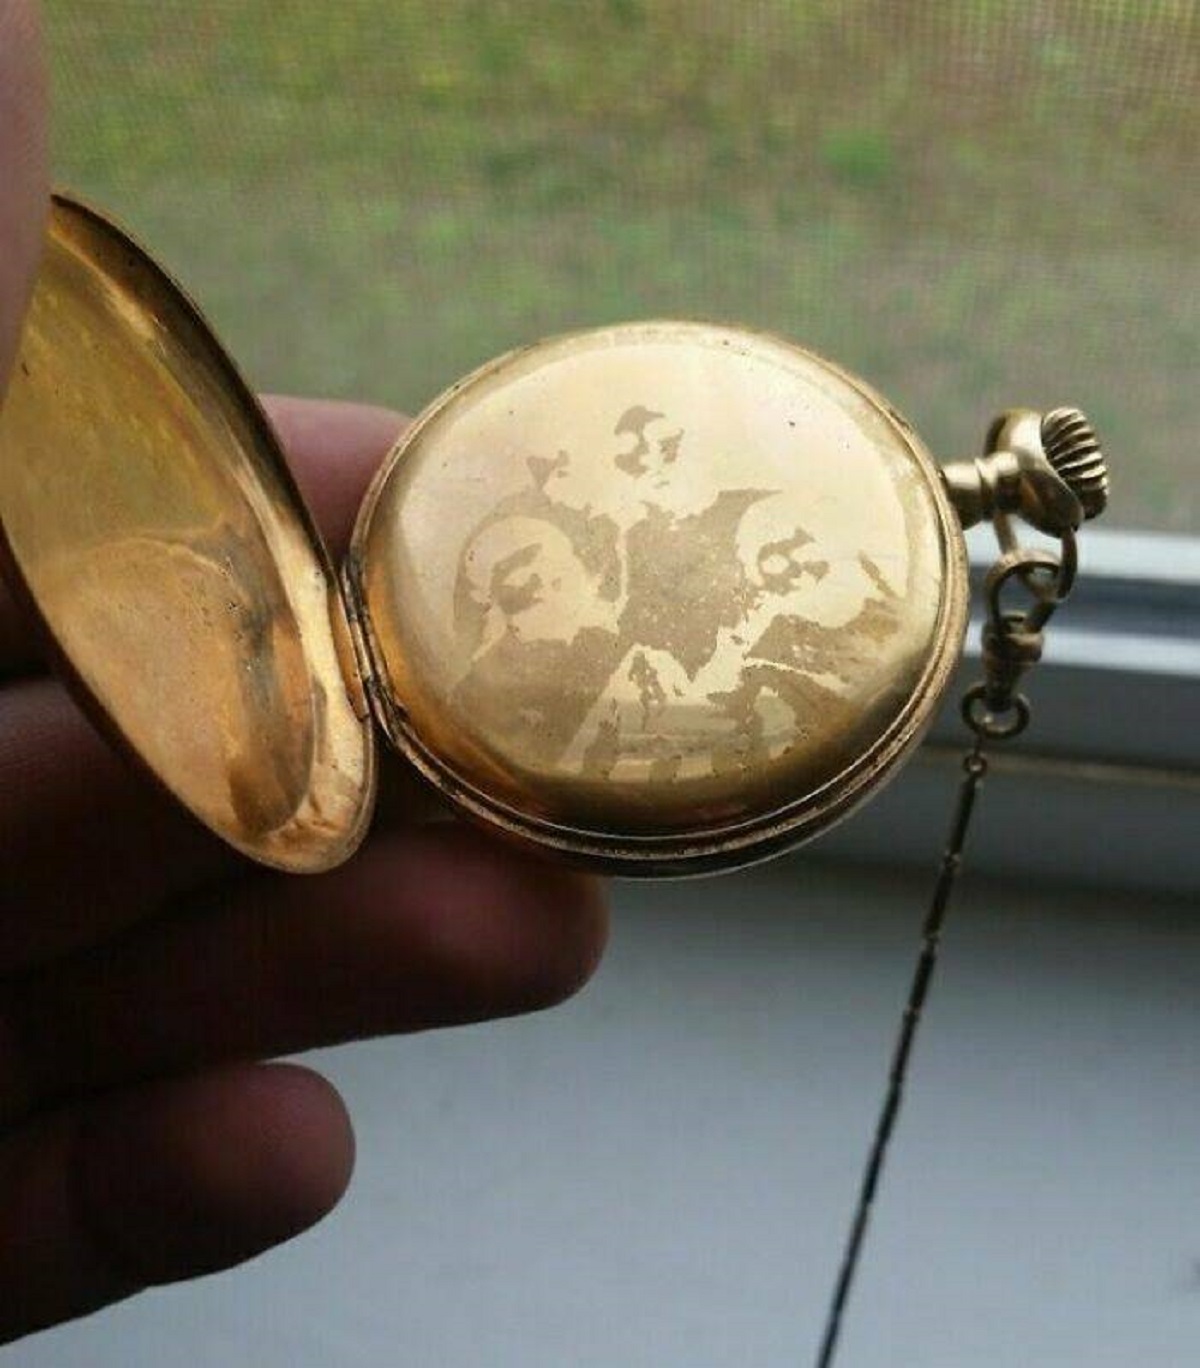 "Family Heirloom Watch That Was Passed Down To Me. Traces Of The Family Photo Carried On The Back Are Still Visible"